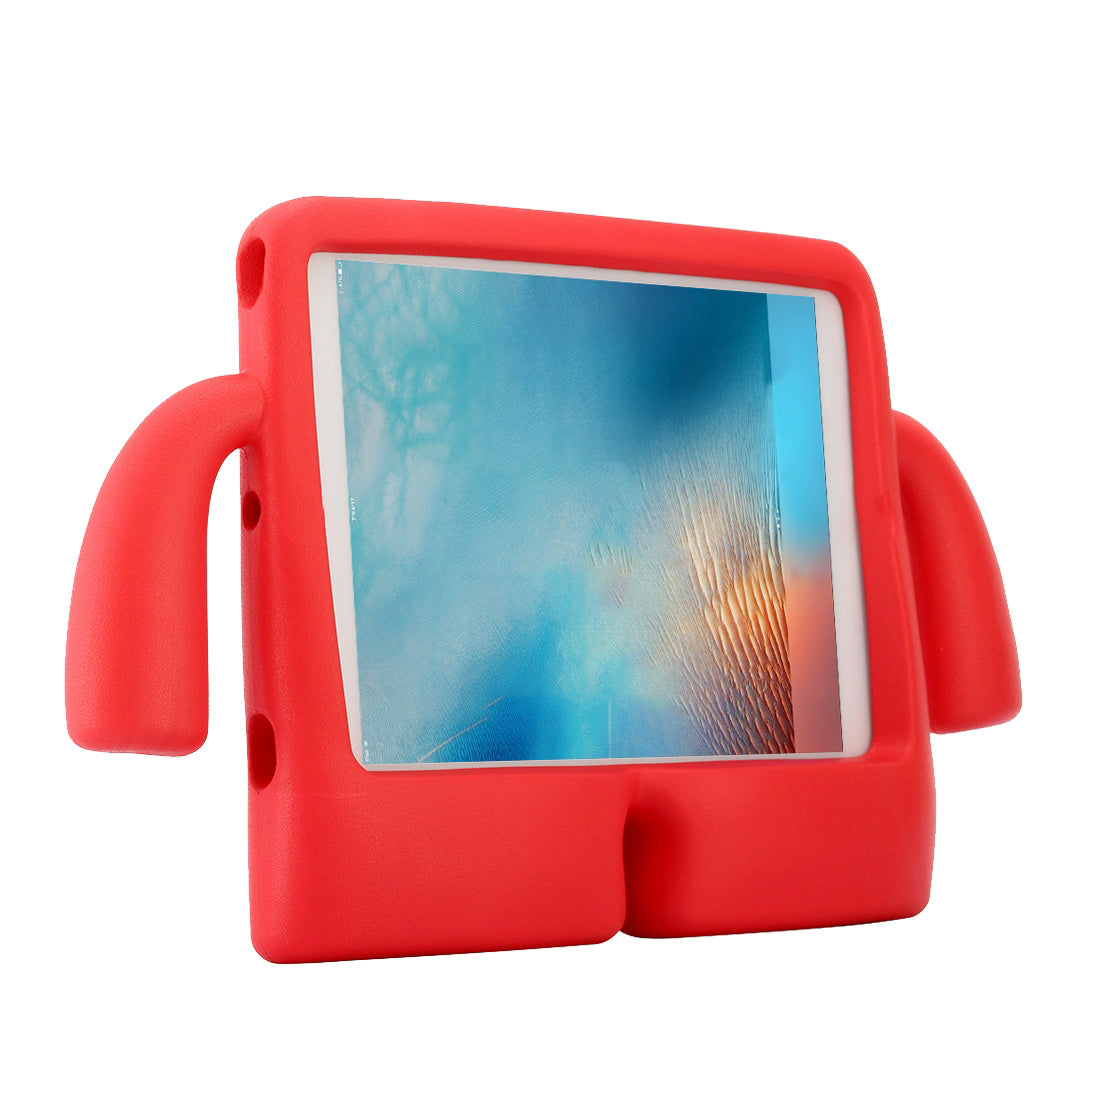 For Apple iPad 10.2" 2020 (8th Gen) Kids Case Shockproof Cover With Carry Handle - Red